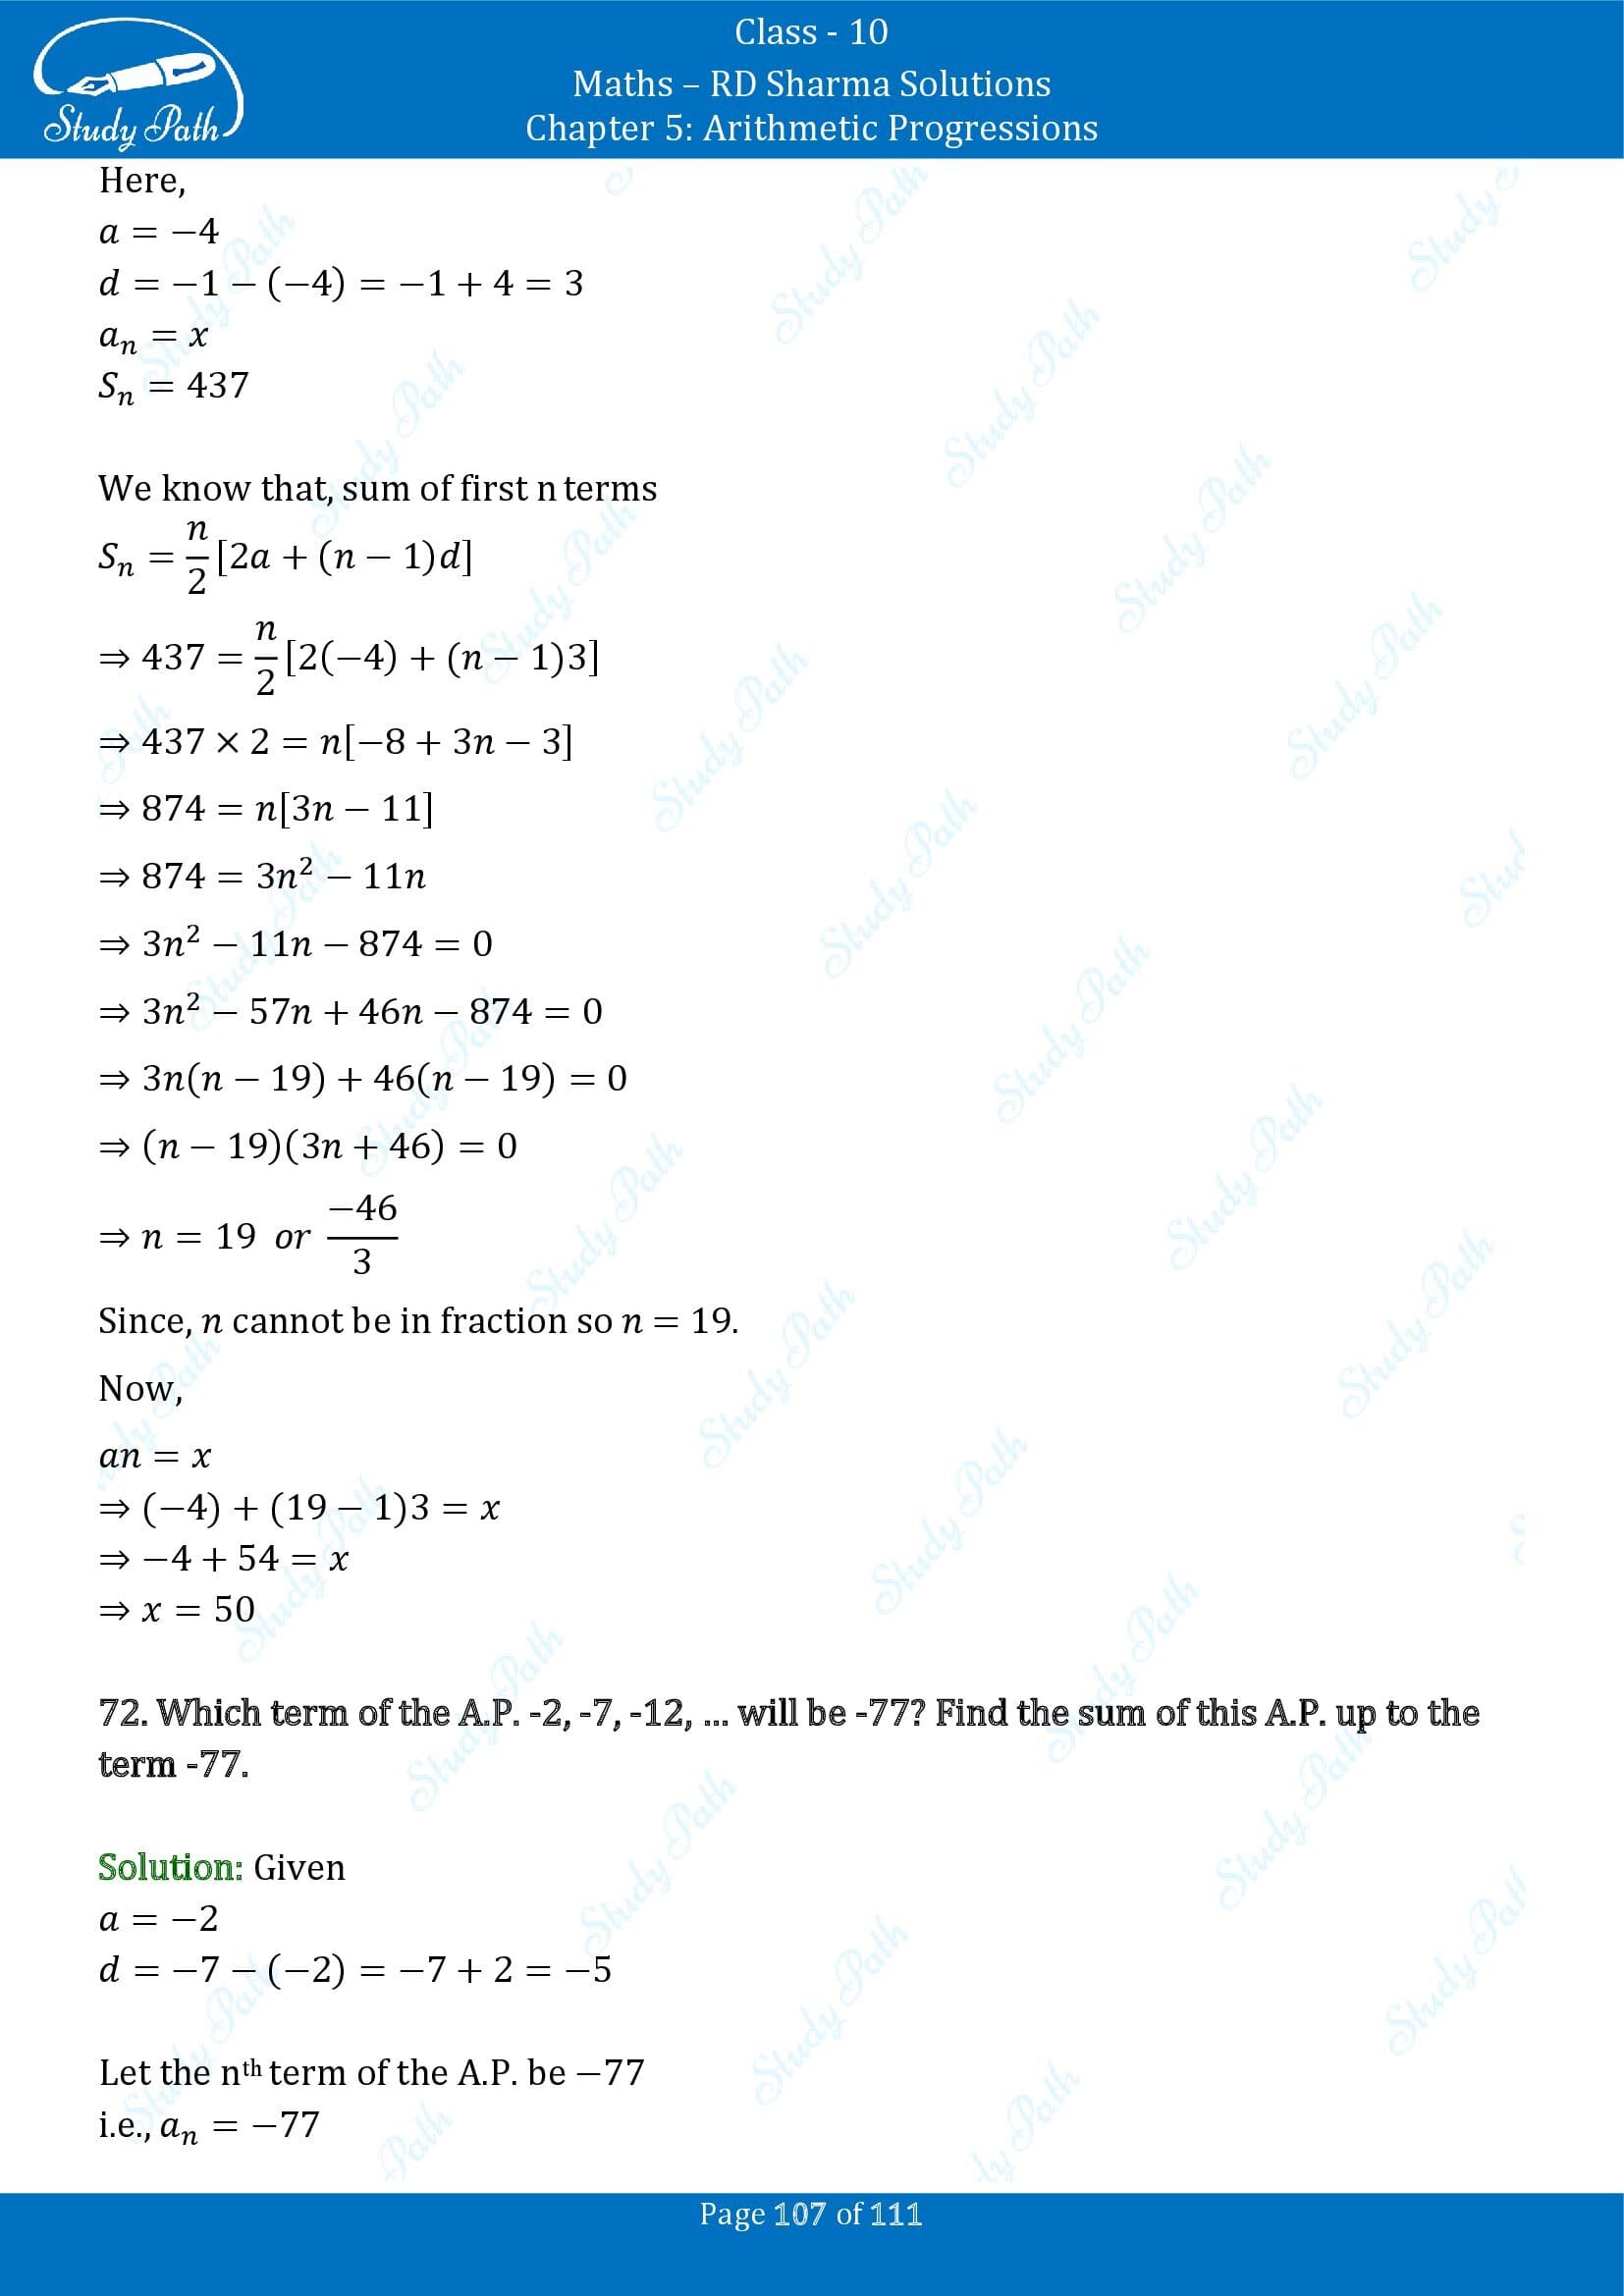 RD Sharma Solutions Class 10 Chapter 5 Arithmetic Progressions Exercise 5.6 00107